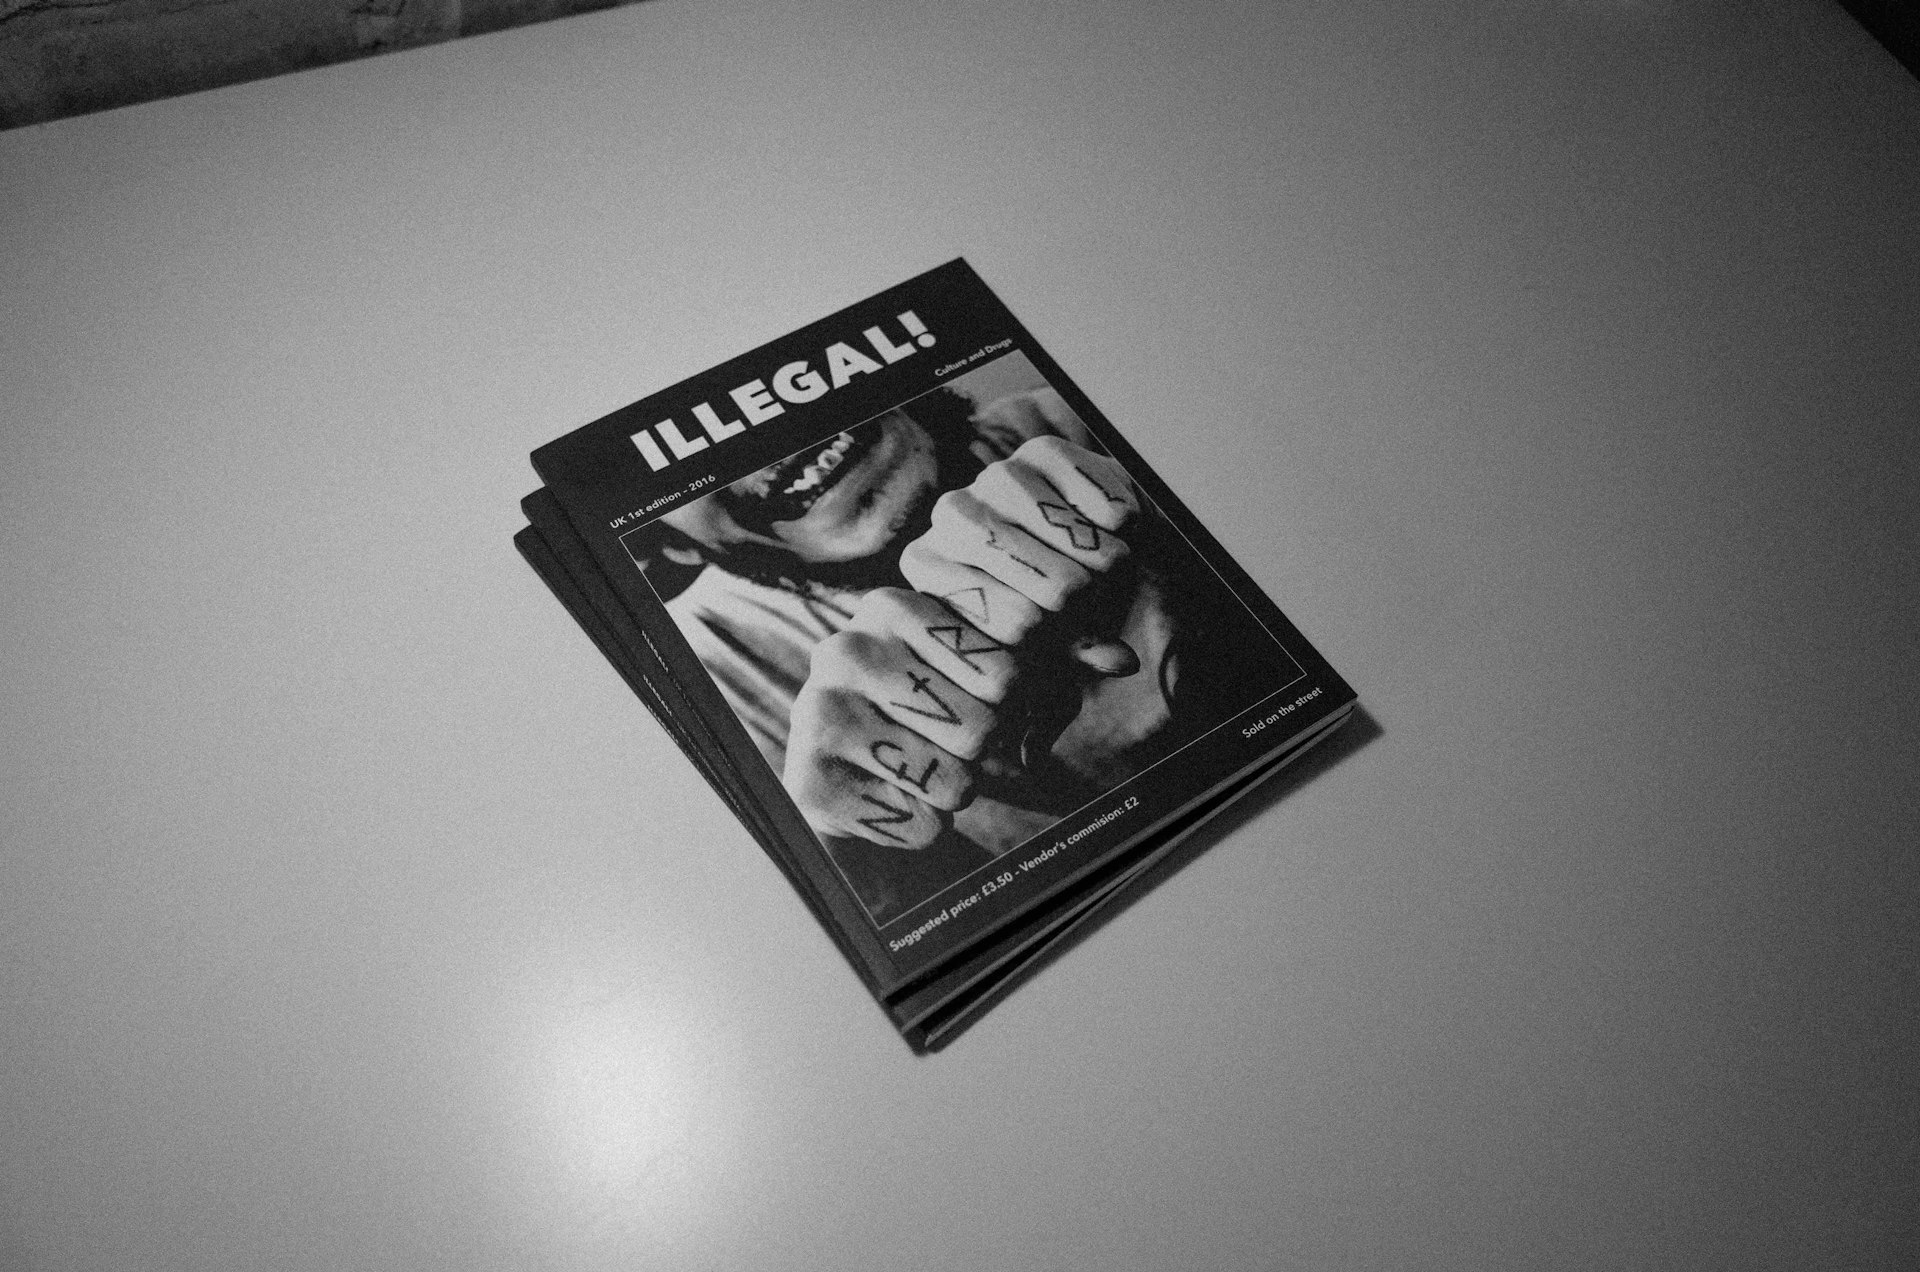 Illegal mag UK edition no1